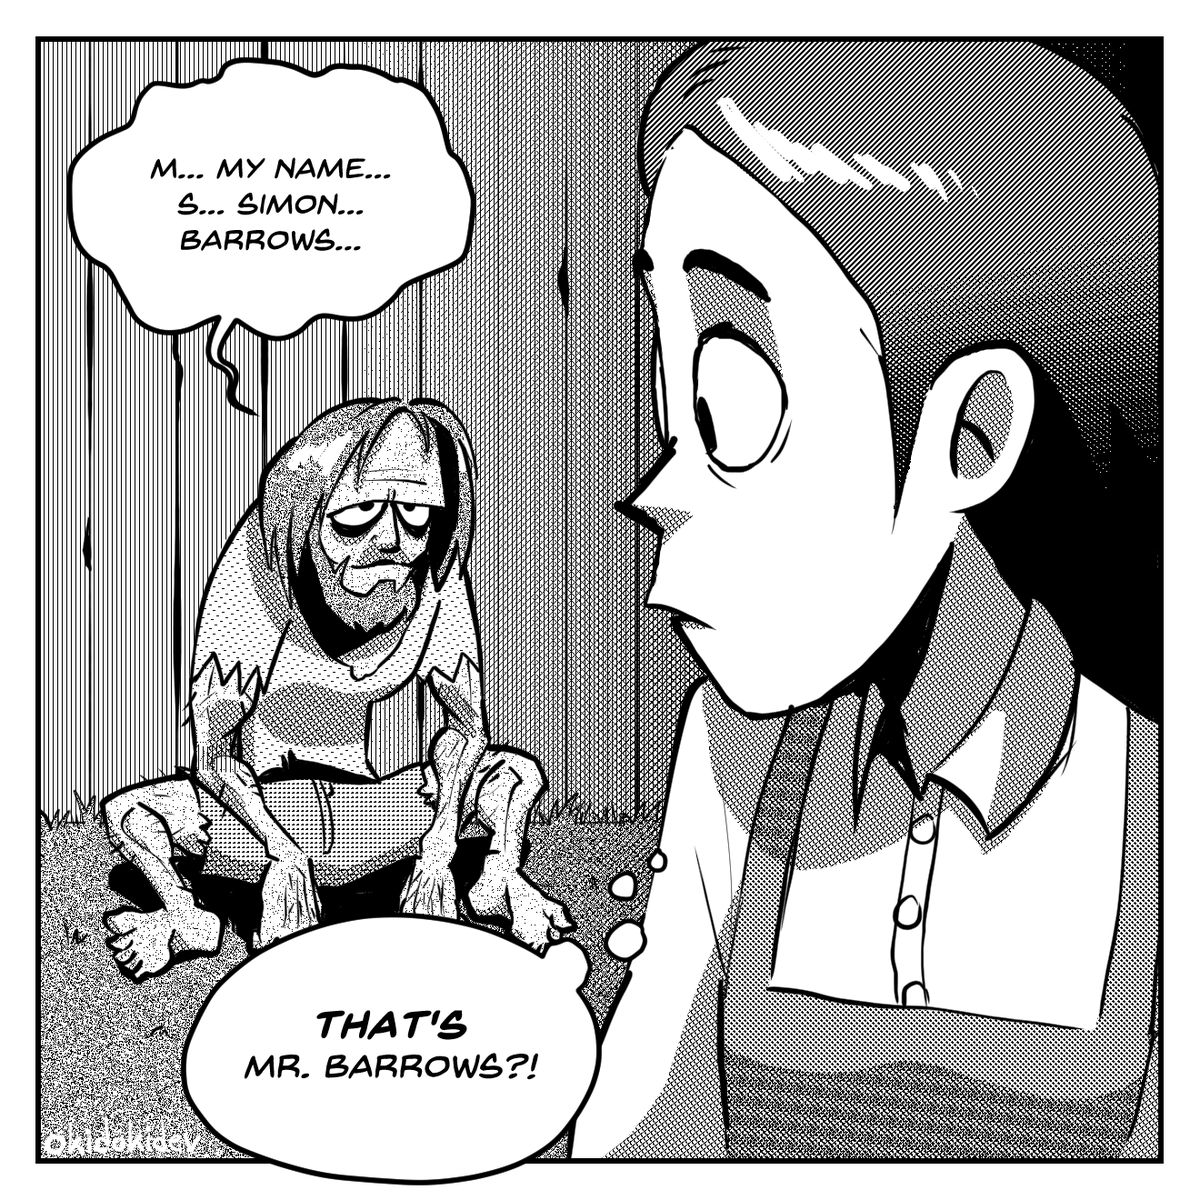 I've been itching to draw some Clock Tower art because there are quite a few scenes that have been firmly nestled in my mind... I also wanted to practice composition and using screentones! I also included a version with speech bubbles to drive home the comic look. 